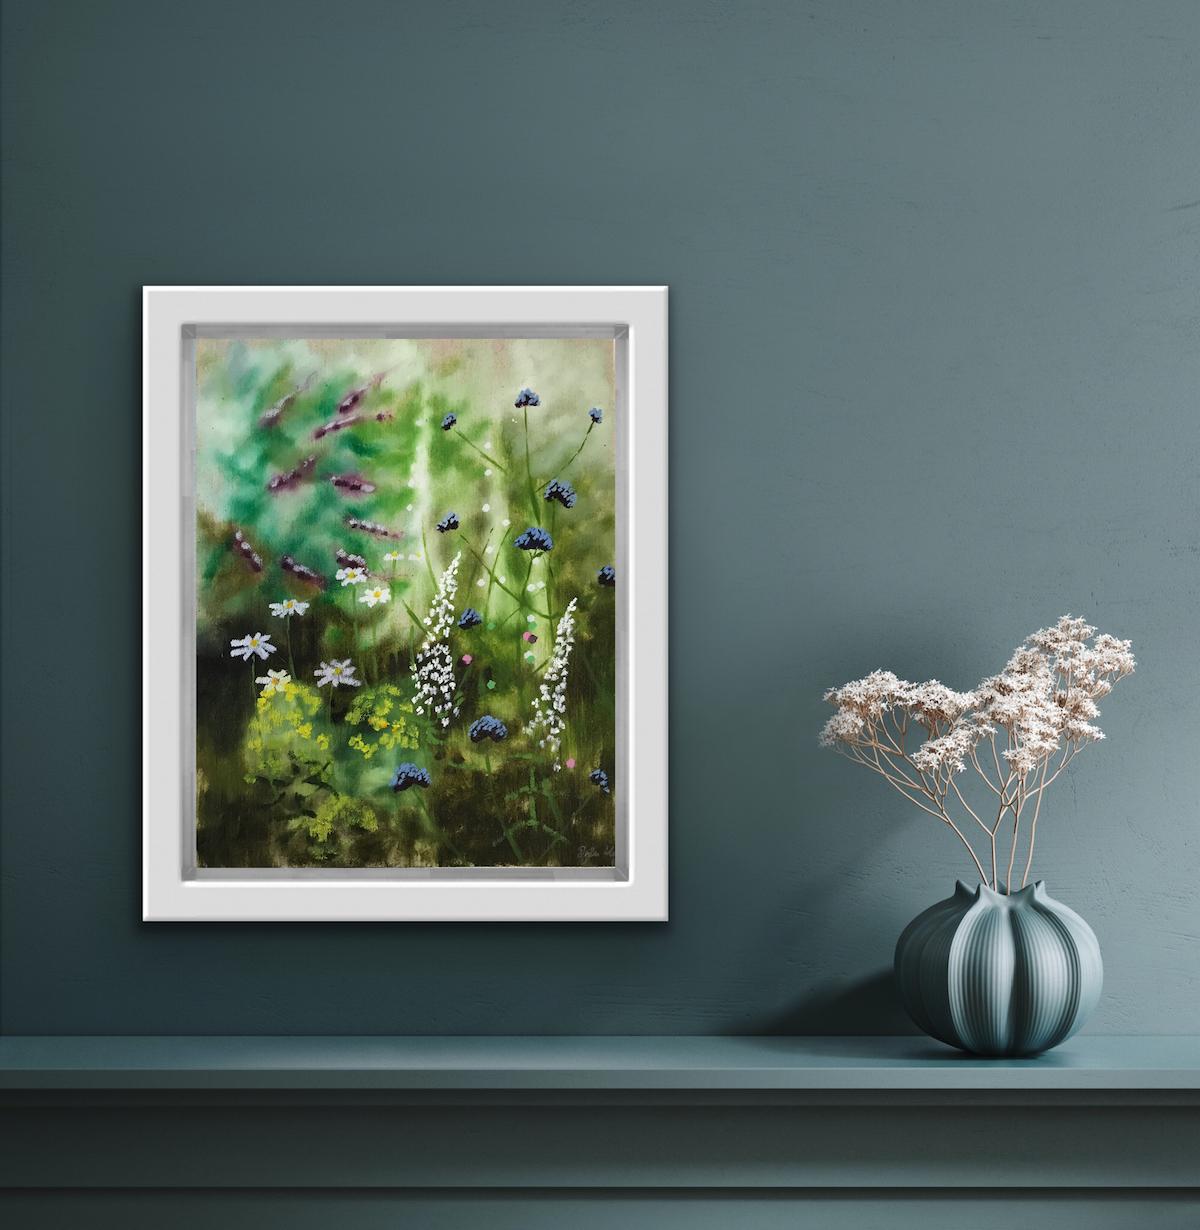 Summer Garden Study VI by Dylan Lloyd, Contemporary painting, botanical art - Gray Landscape Painting by Dylan Lloyd 